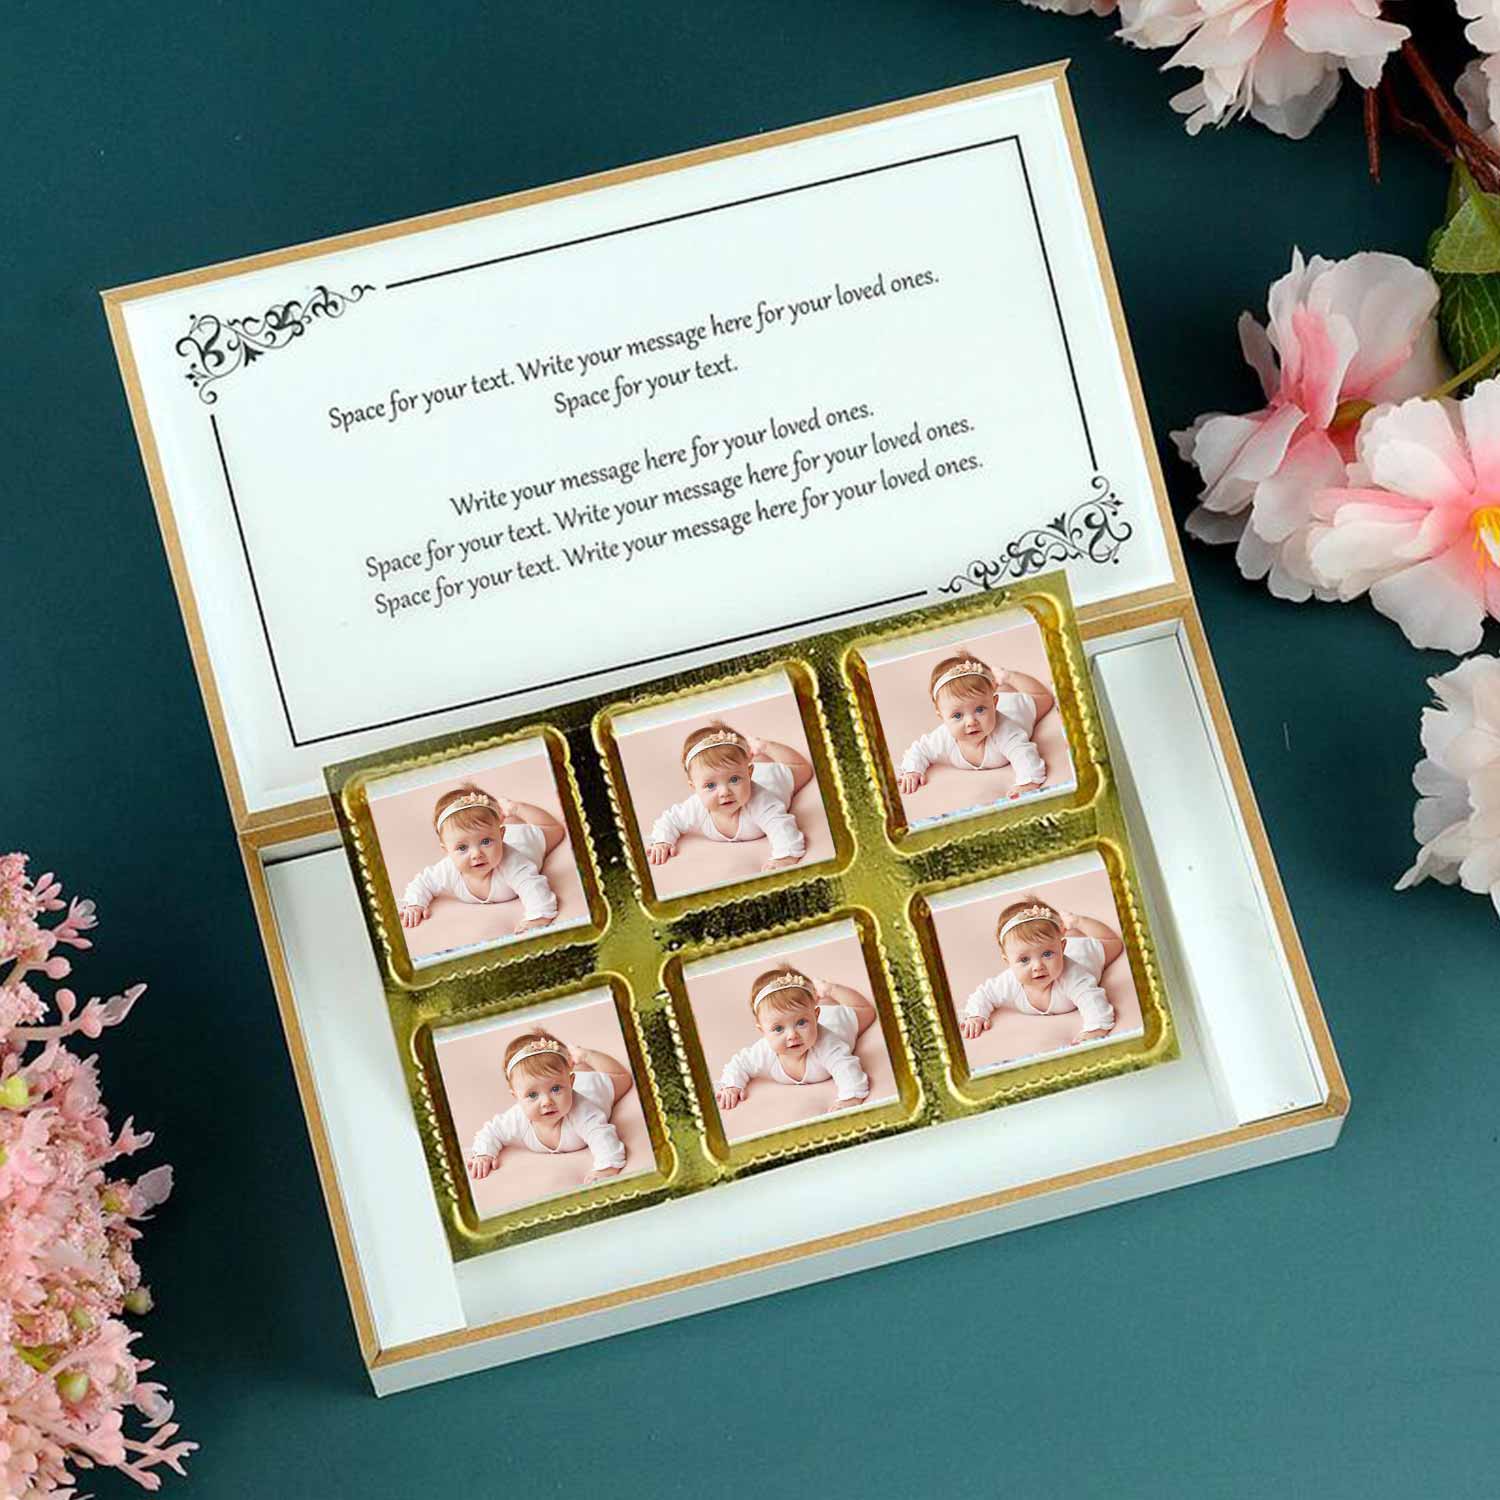 customized white wooden box with all wrapper printed chocolates. There is also a personalized message printed on Message paper inside the box.